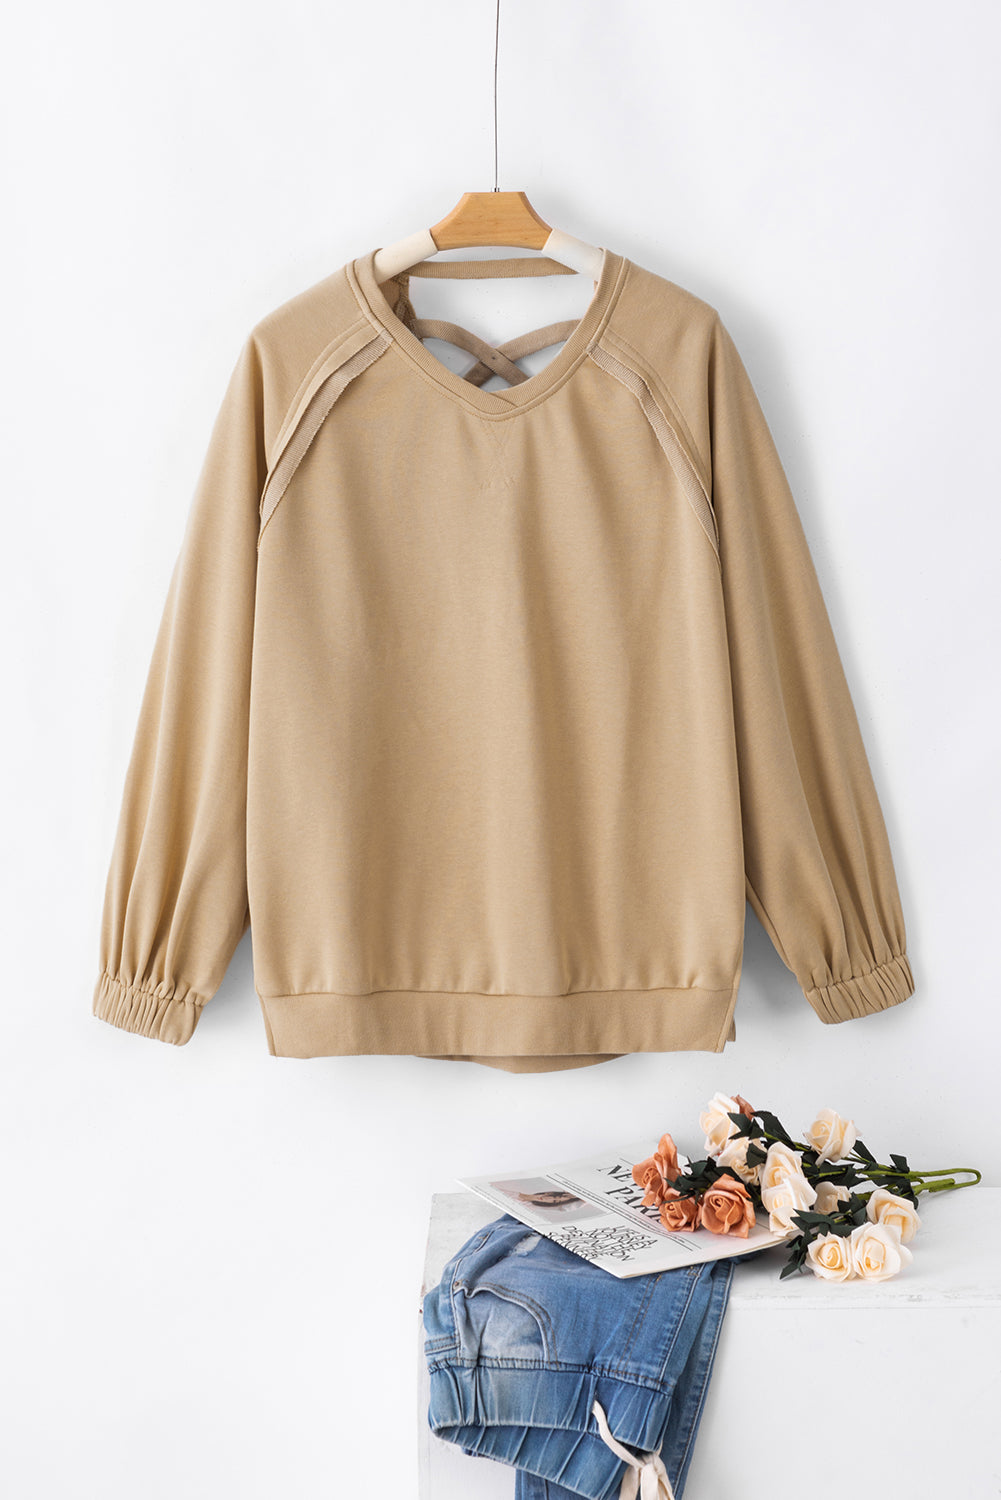 Light French Beige Solid Color Lattice Hollow Out Back Sweatshirt